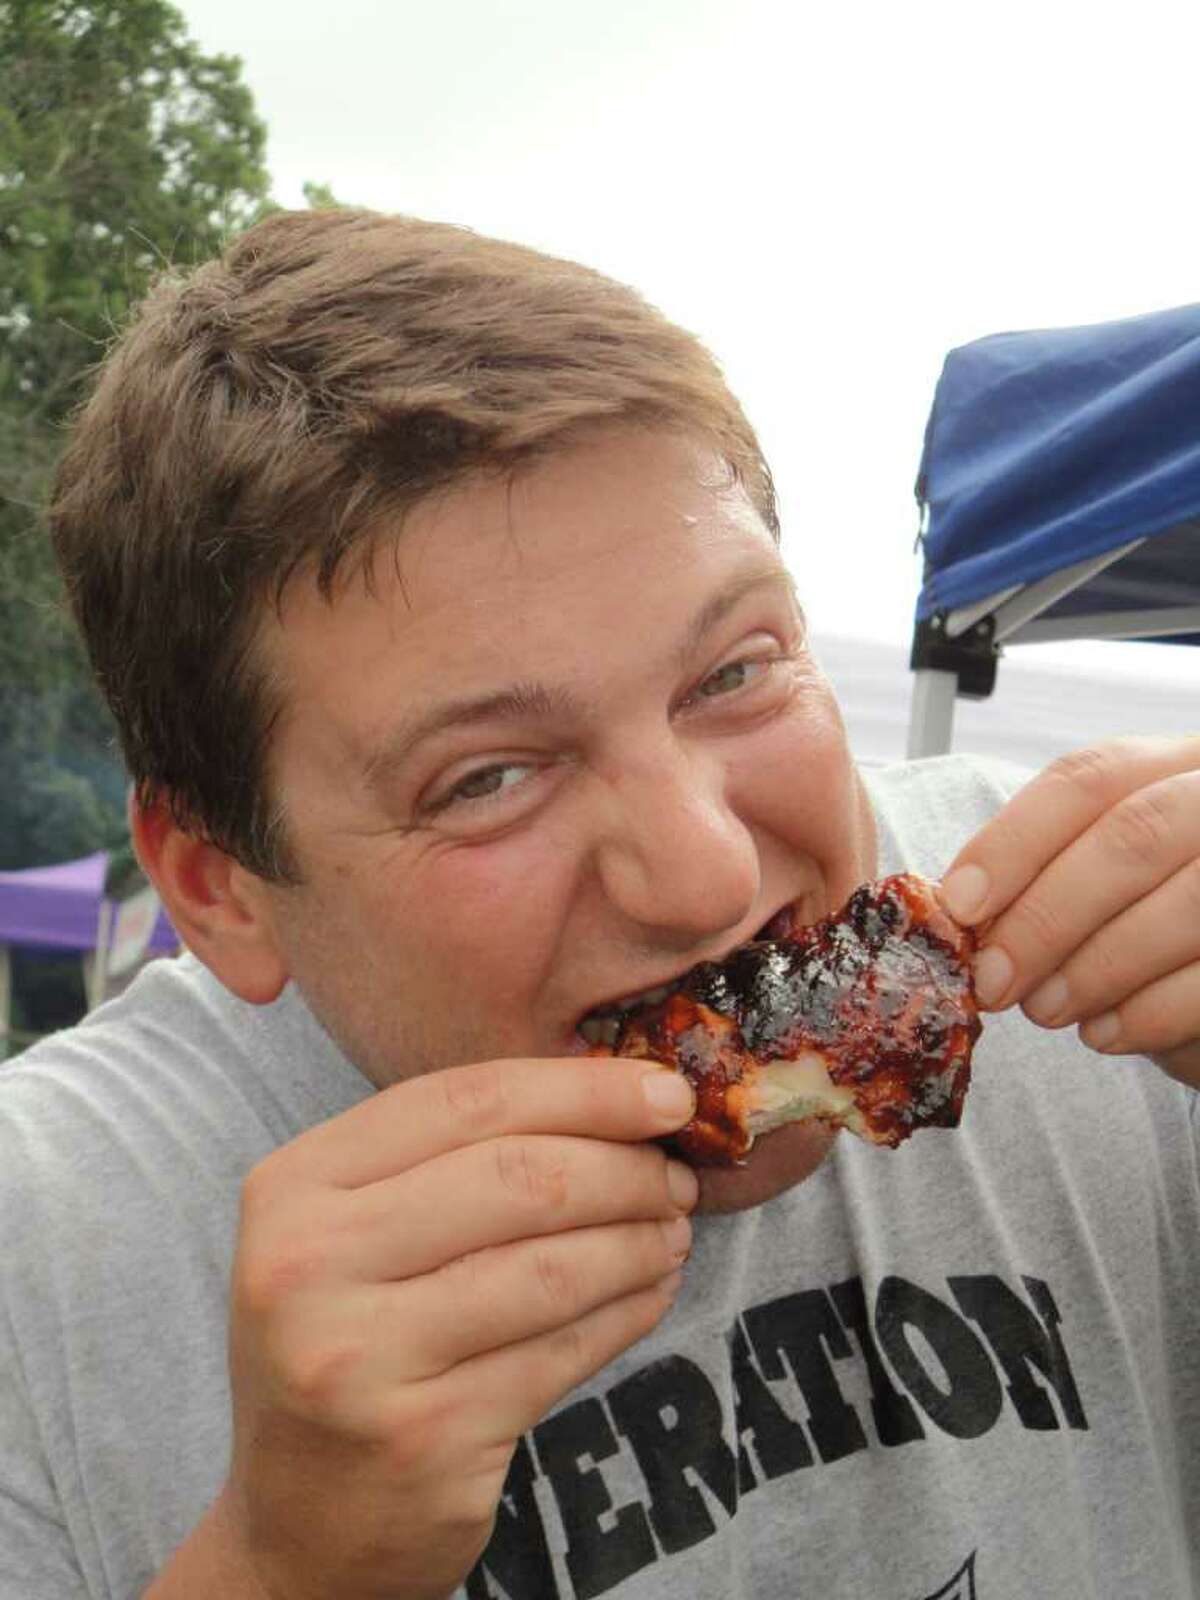 Scott Braun, a member of the team Generation Swine, tastes a barbecued chicken thigh on a break from working on his teamís entry in the 4th annual Blues, Views & BBQ Festival. Generation Swineís chicken took first place in the Backyard Chef portion of the competition last year and second place overall.